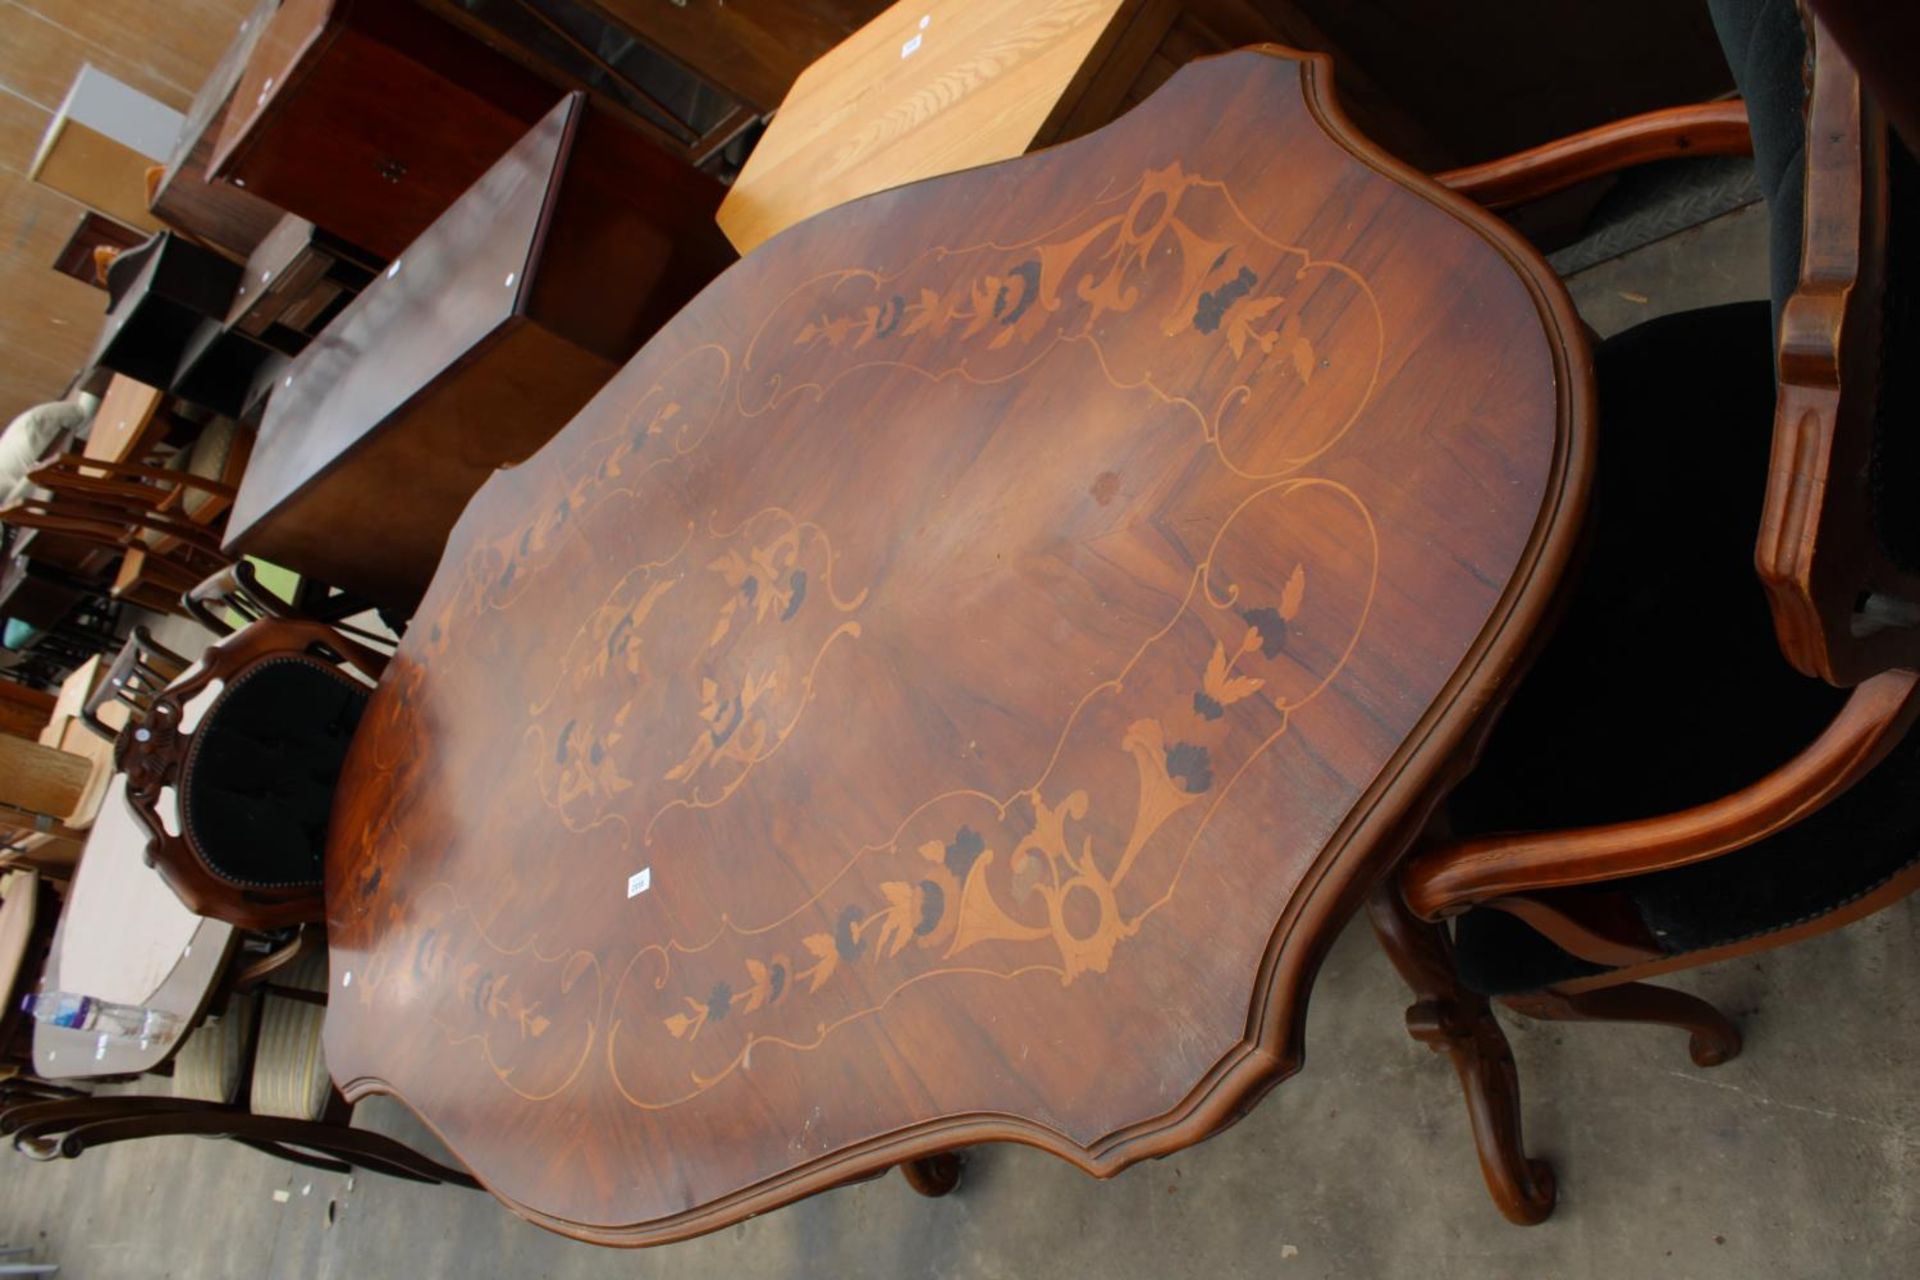 AN ITALIAN STYLE PEDESTAL DINING TABLE WITH MARQUETRY TOP AND A PAIR OF CARVER CHAIRS - Image 3 of 6